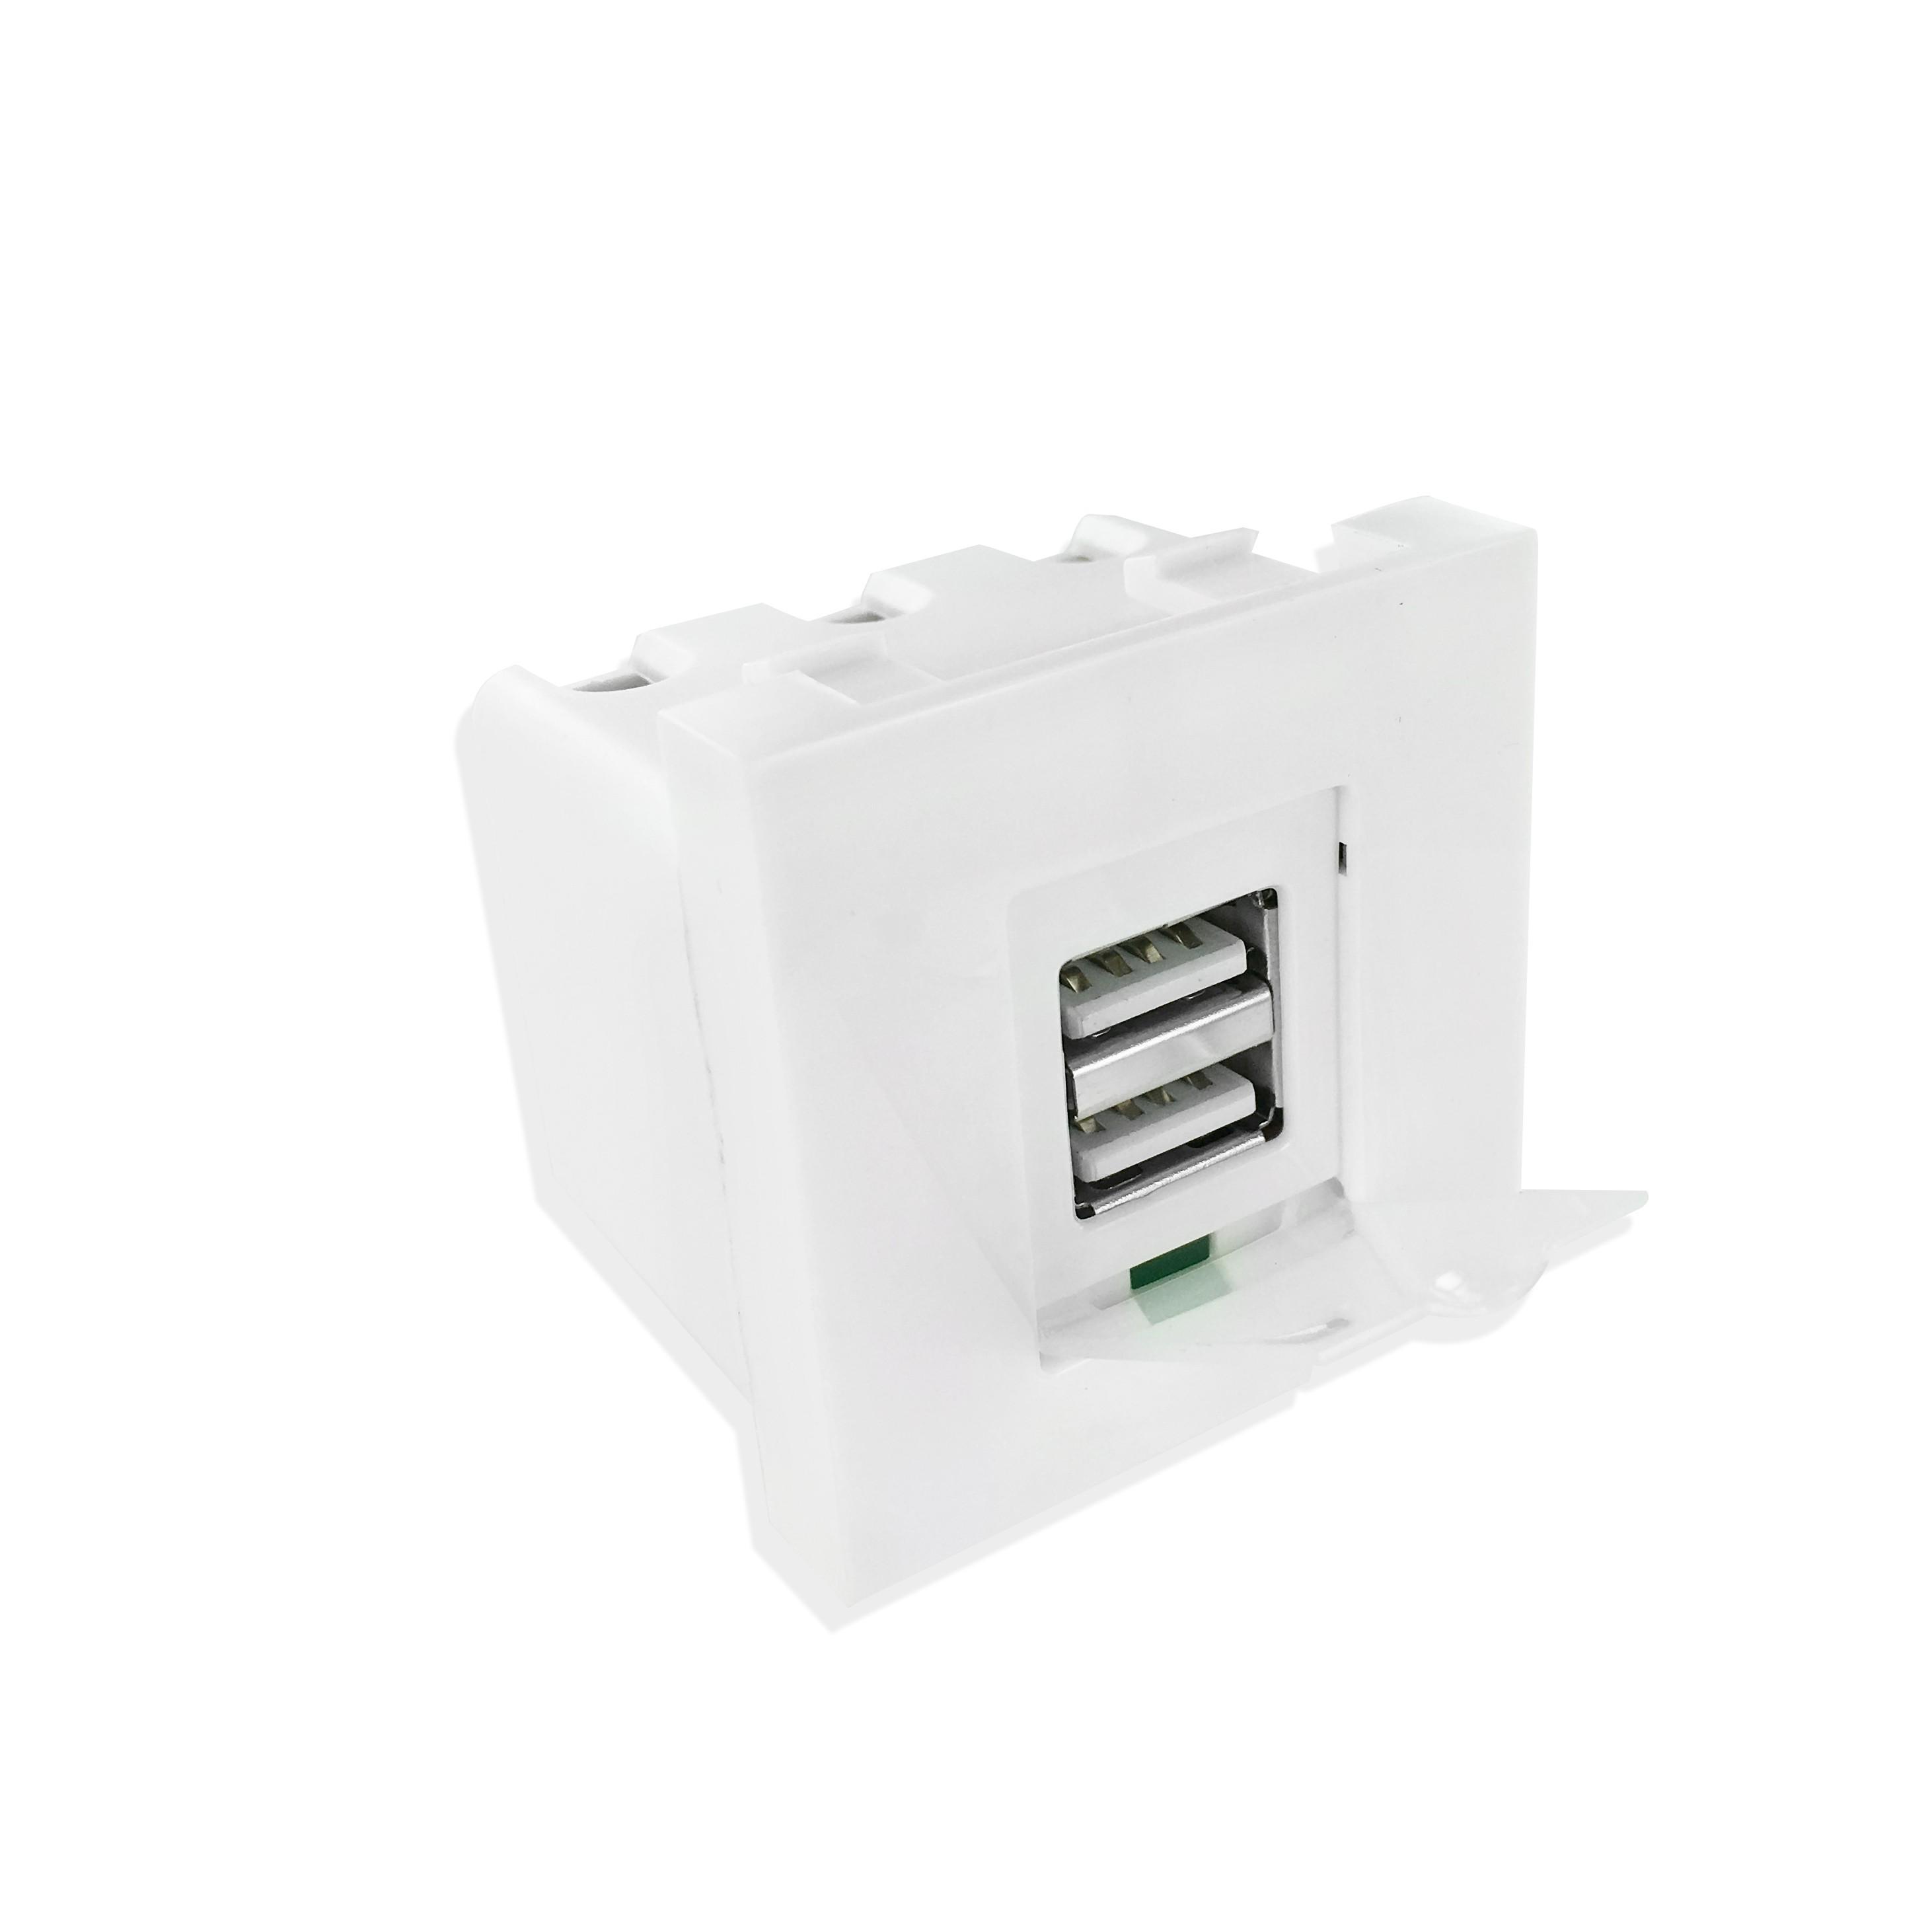 Plastron 45x45 Chargeur USB 2 sorties type A F - 230V vers 5V 2.1A